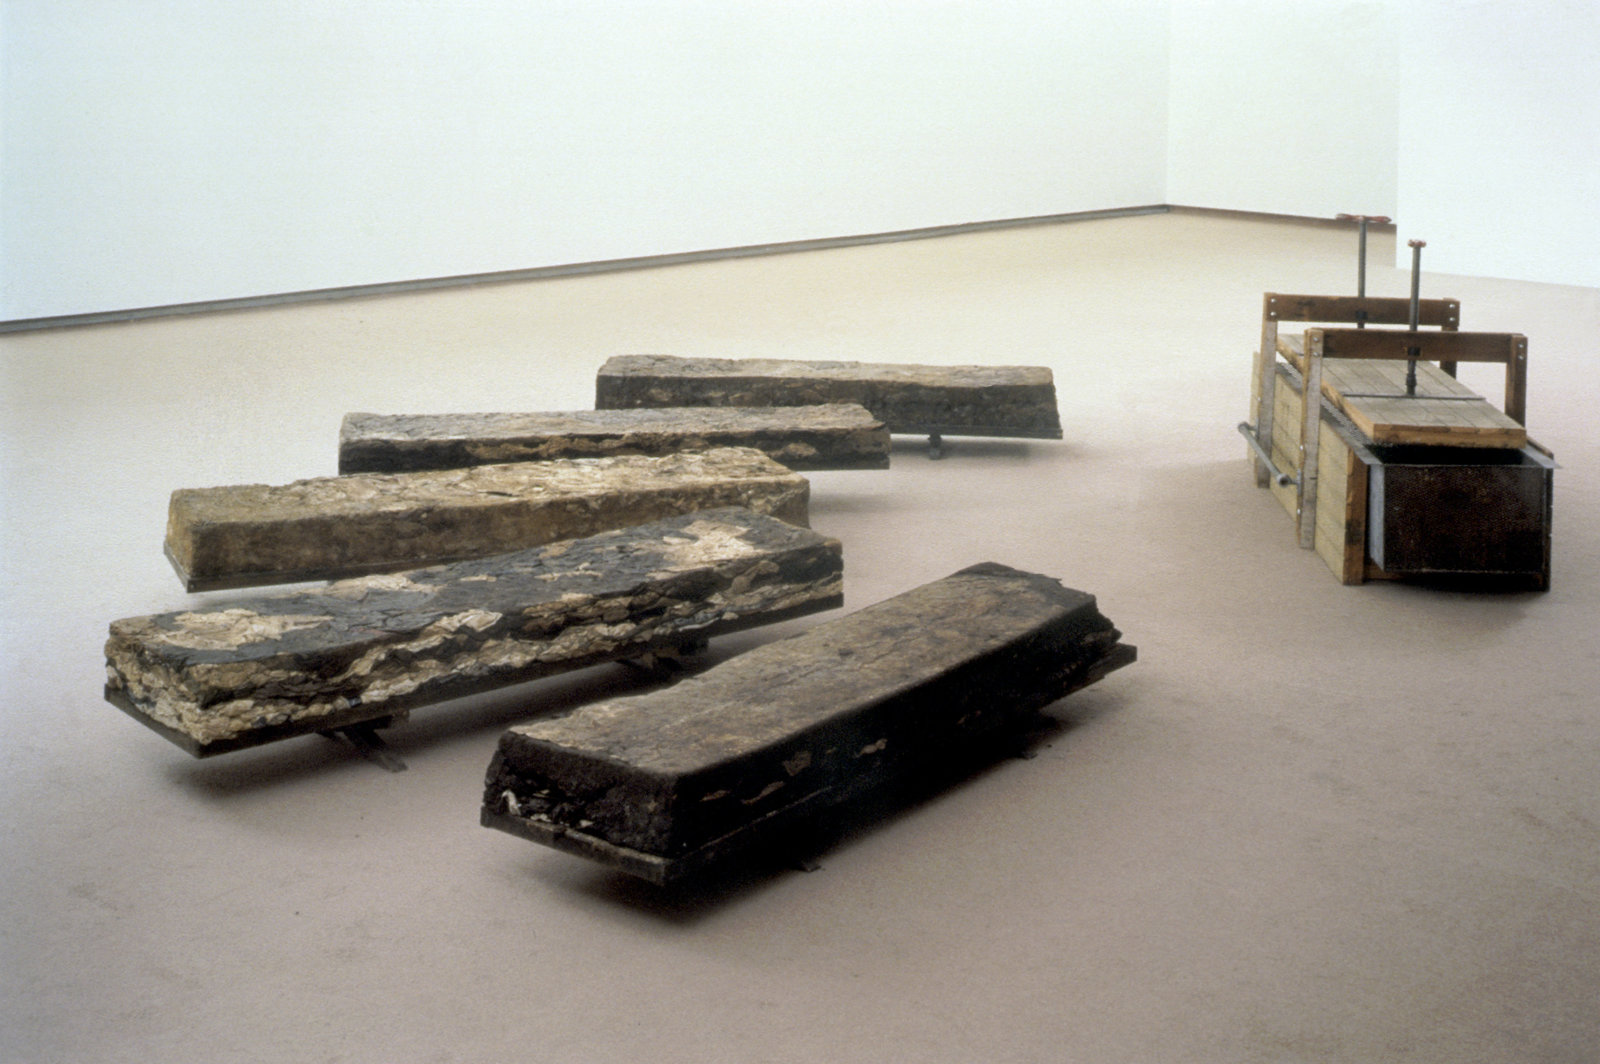 Liz Magor, Four Boys and a Girl, 1979, fabric, grass, steel, wood, dimensions variable